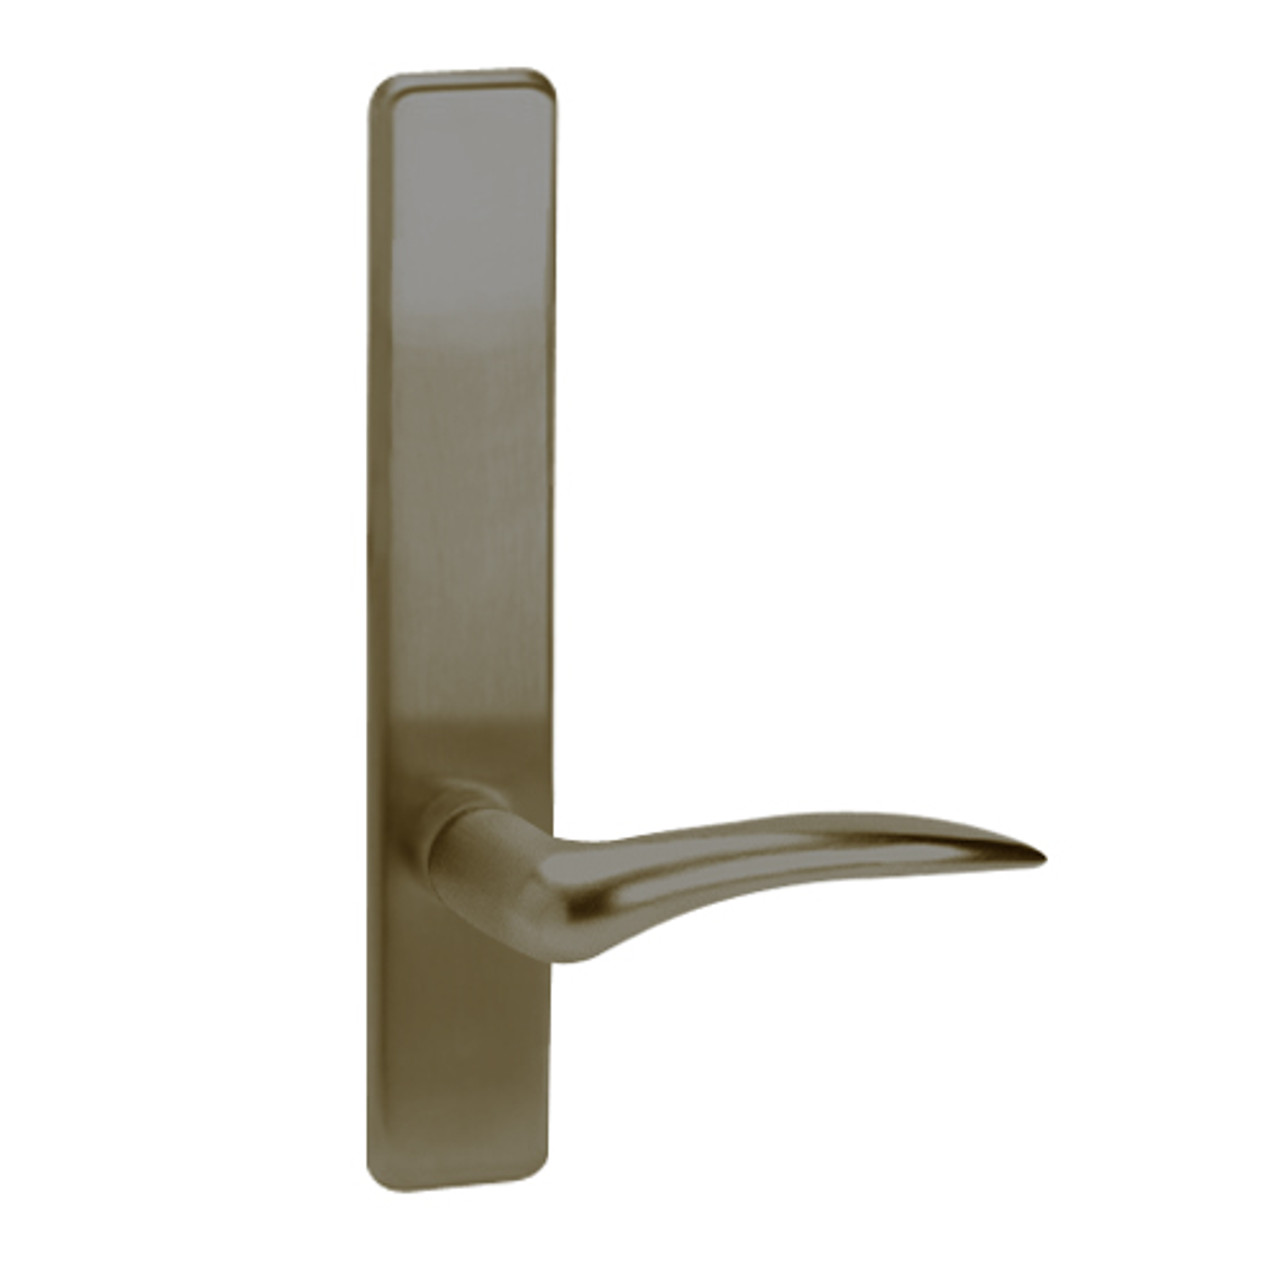 D850-613-RHR Corbin ED4000 Series Exit Device Trim with Dummy Dirke Lever in Oil Rubbed Bronze Finish